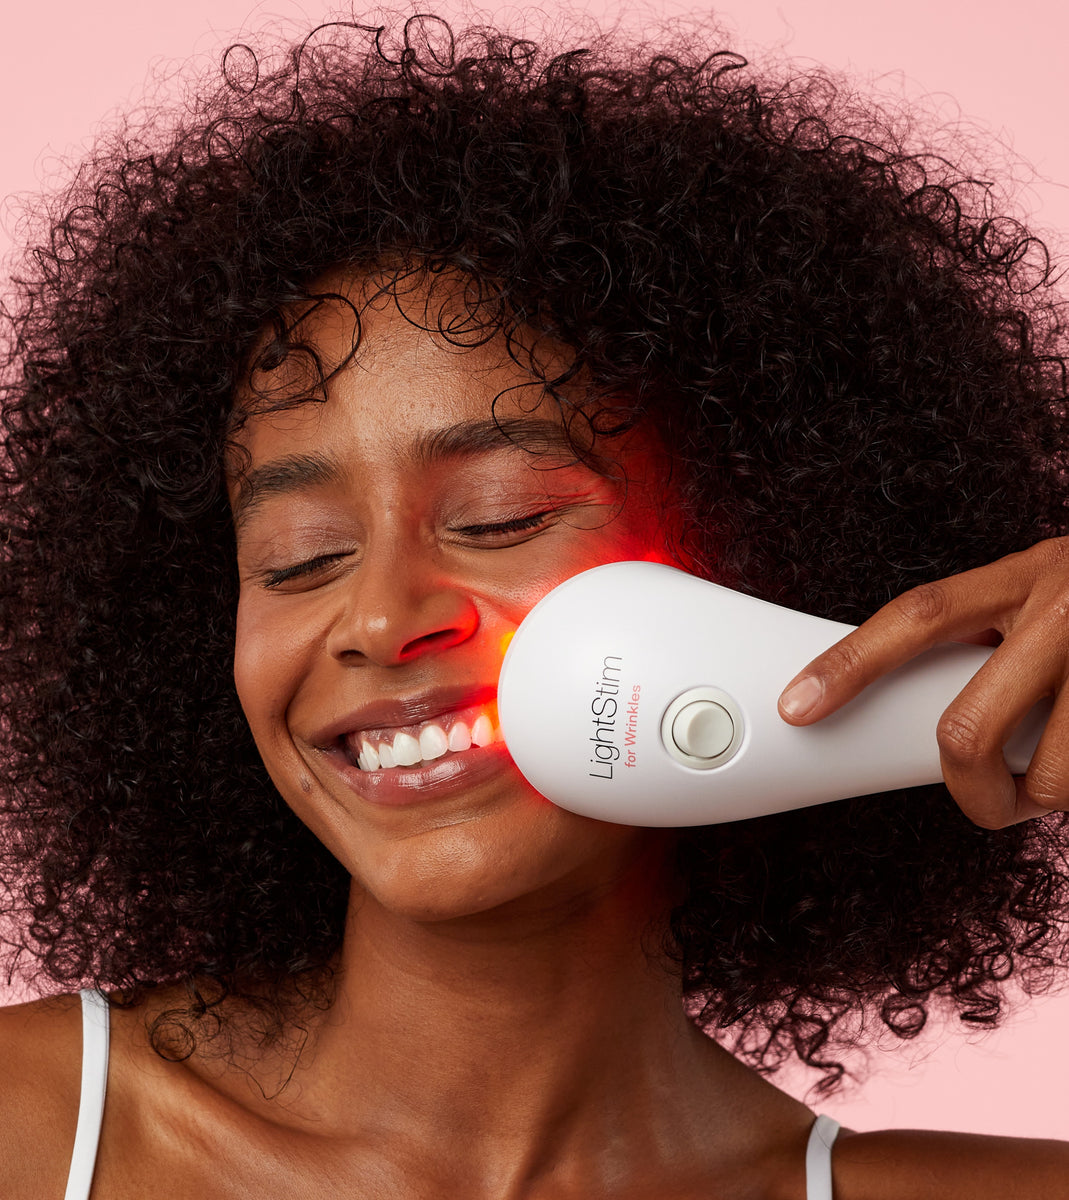 What is red light therapy? Uses, benefits and risks